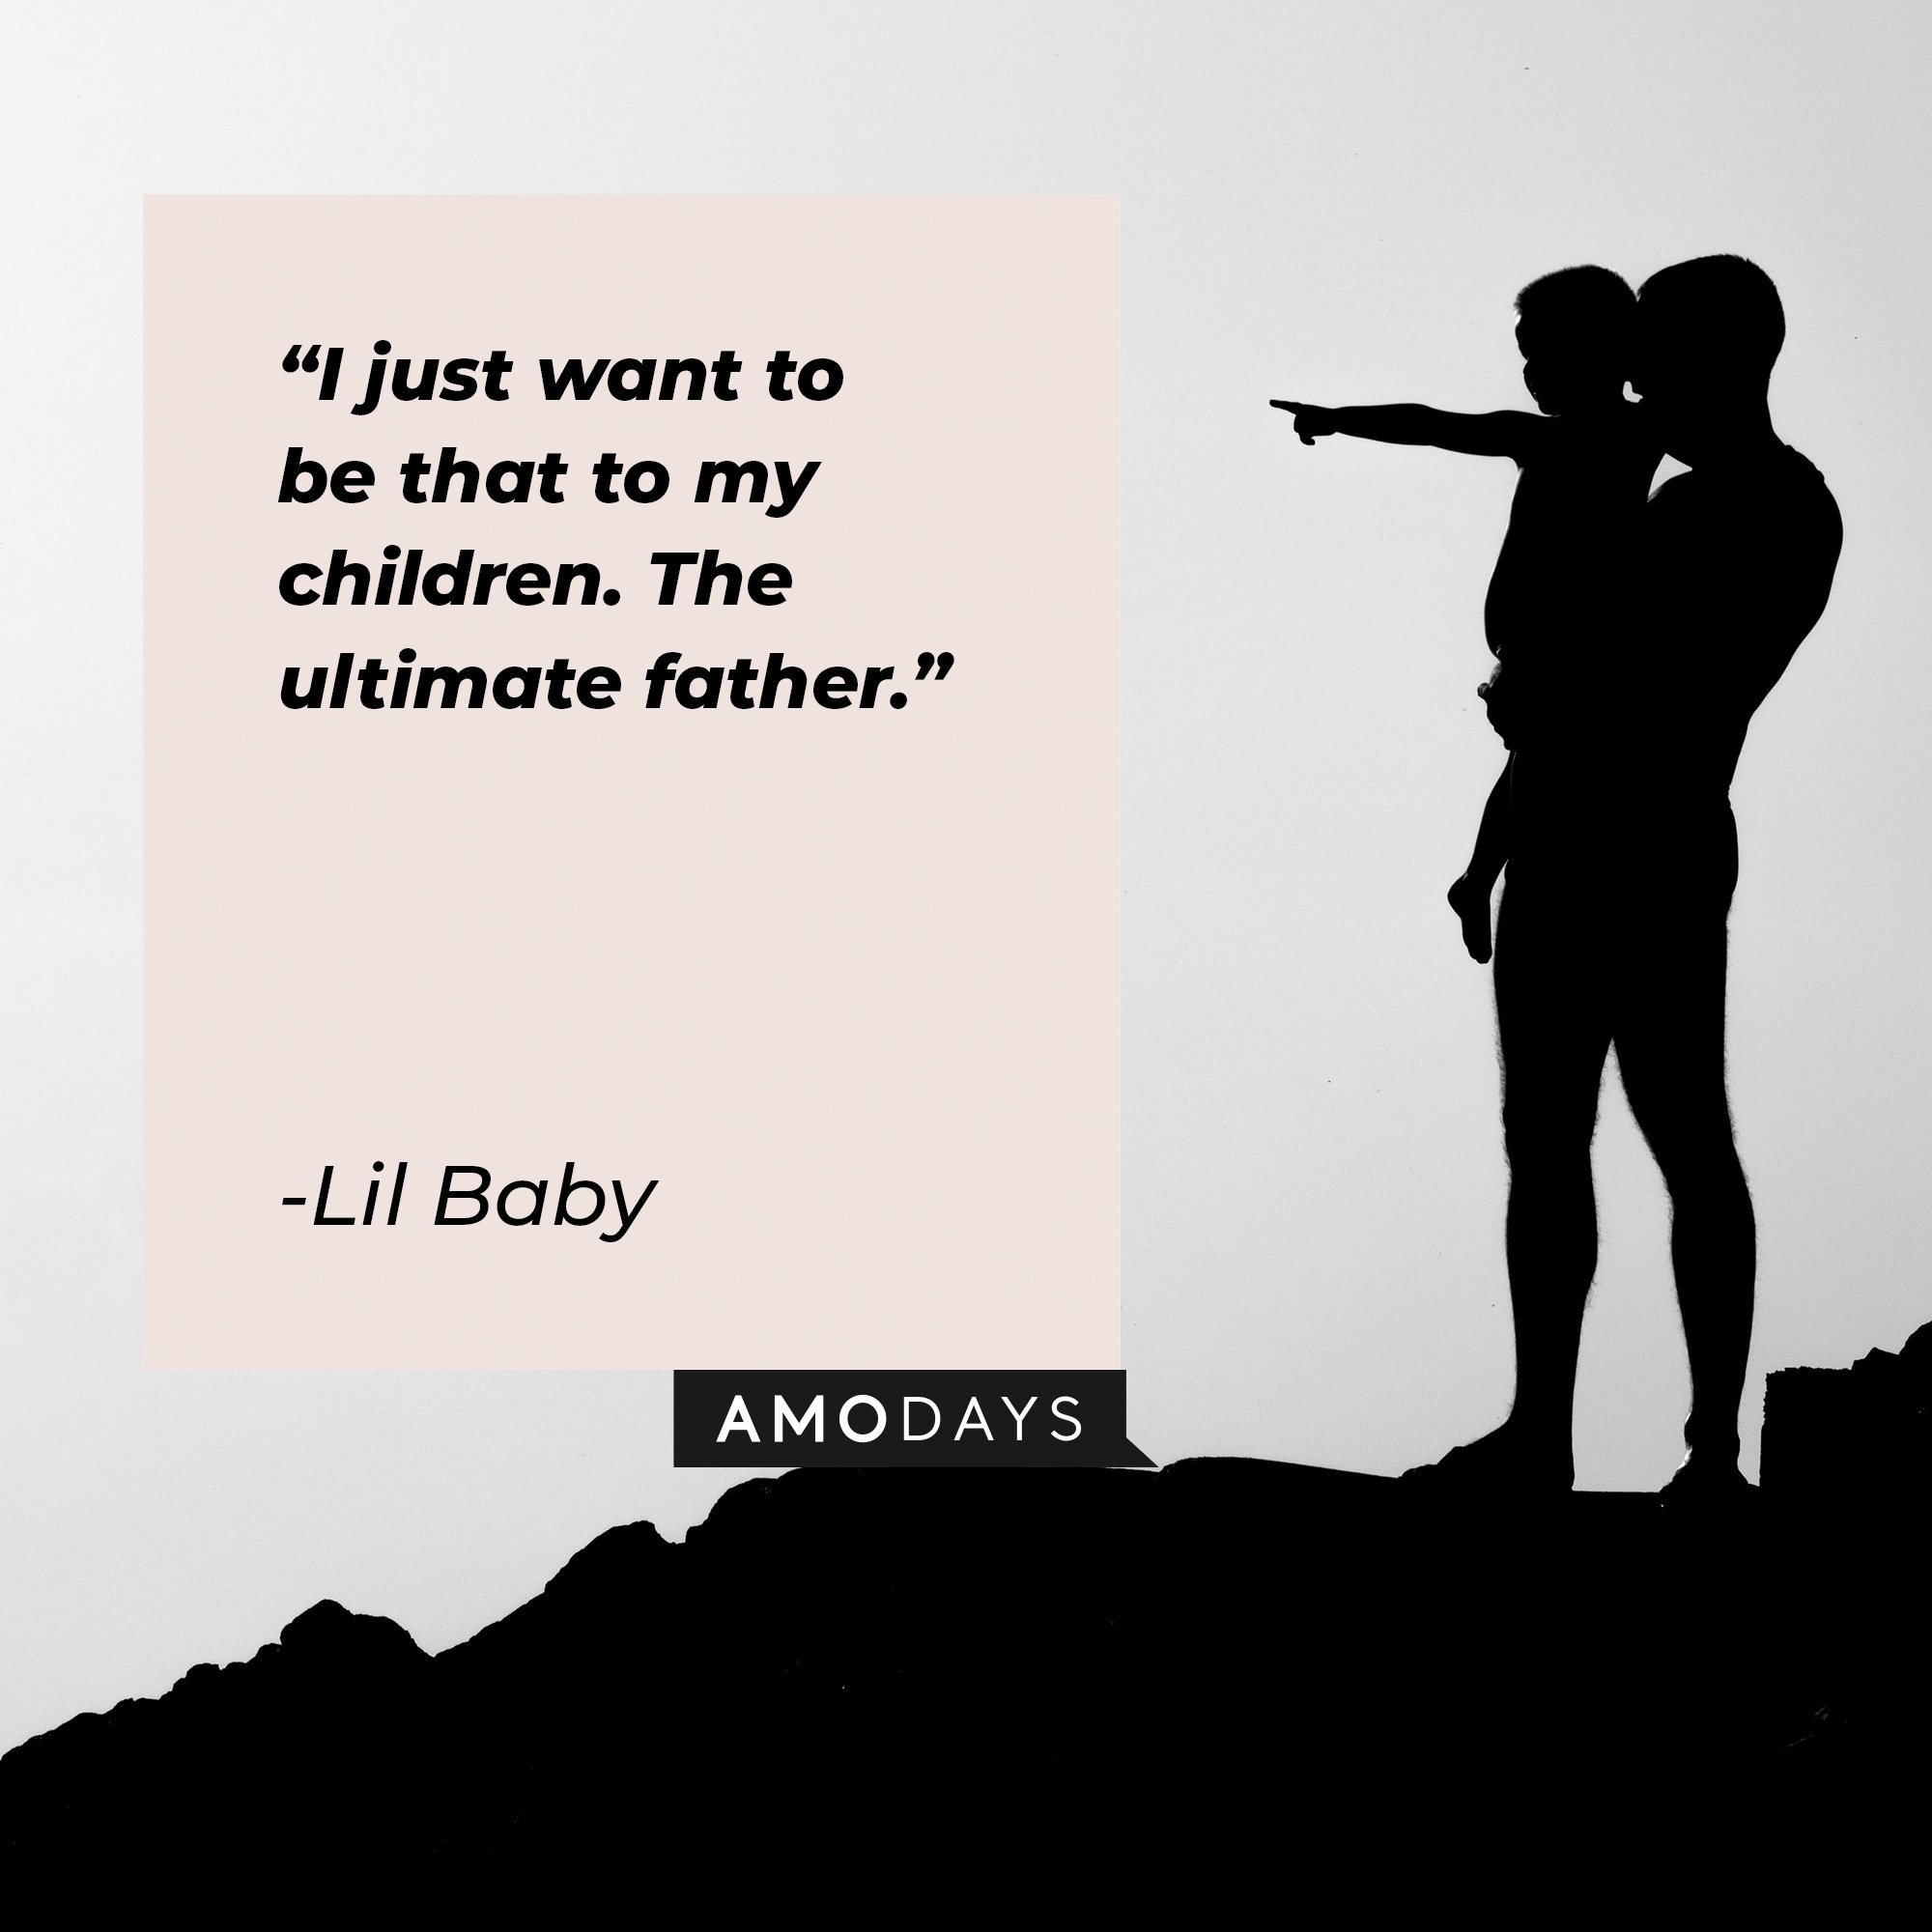 Lil Baby’s quote: "I just want to be that to my children. The ultimate father." | Image: AmoDays